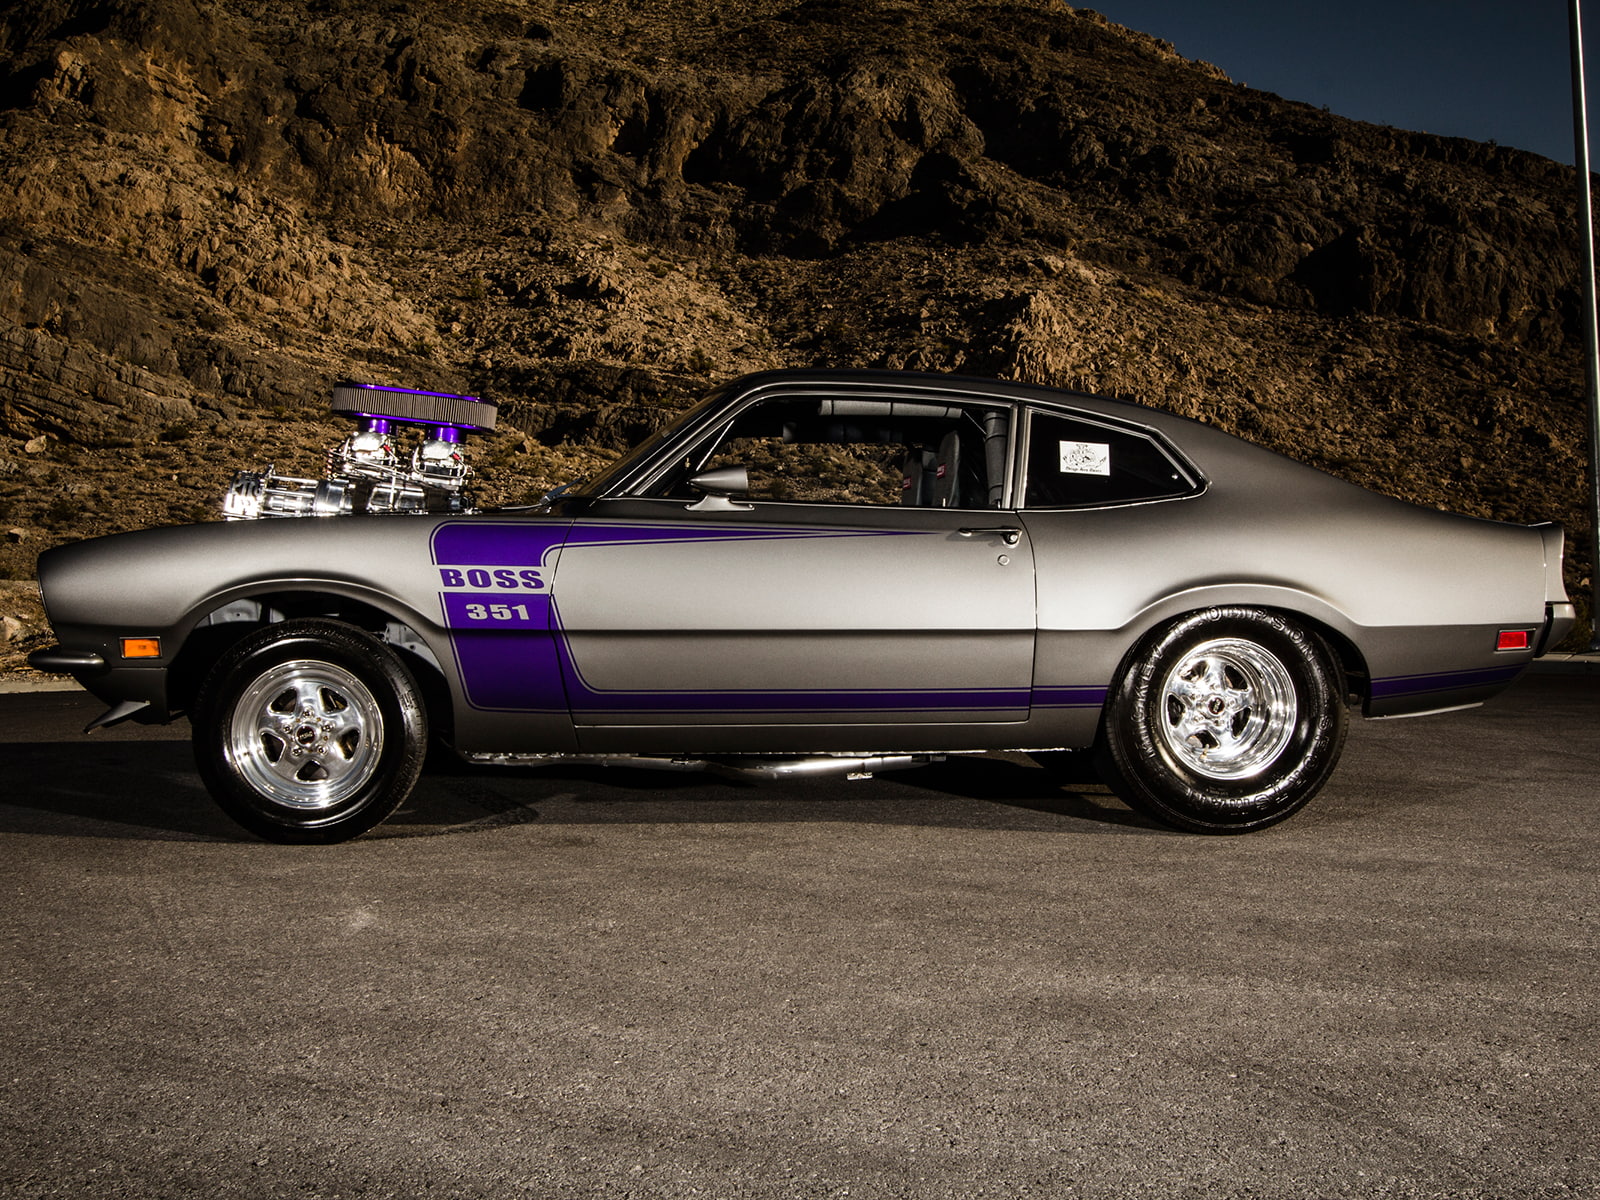 classic, drag, engine, ford, hot, maverick, muscle, race, racing